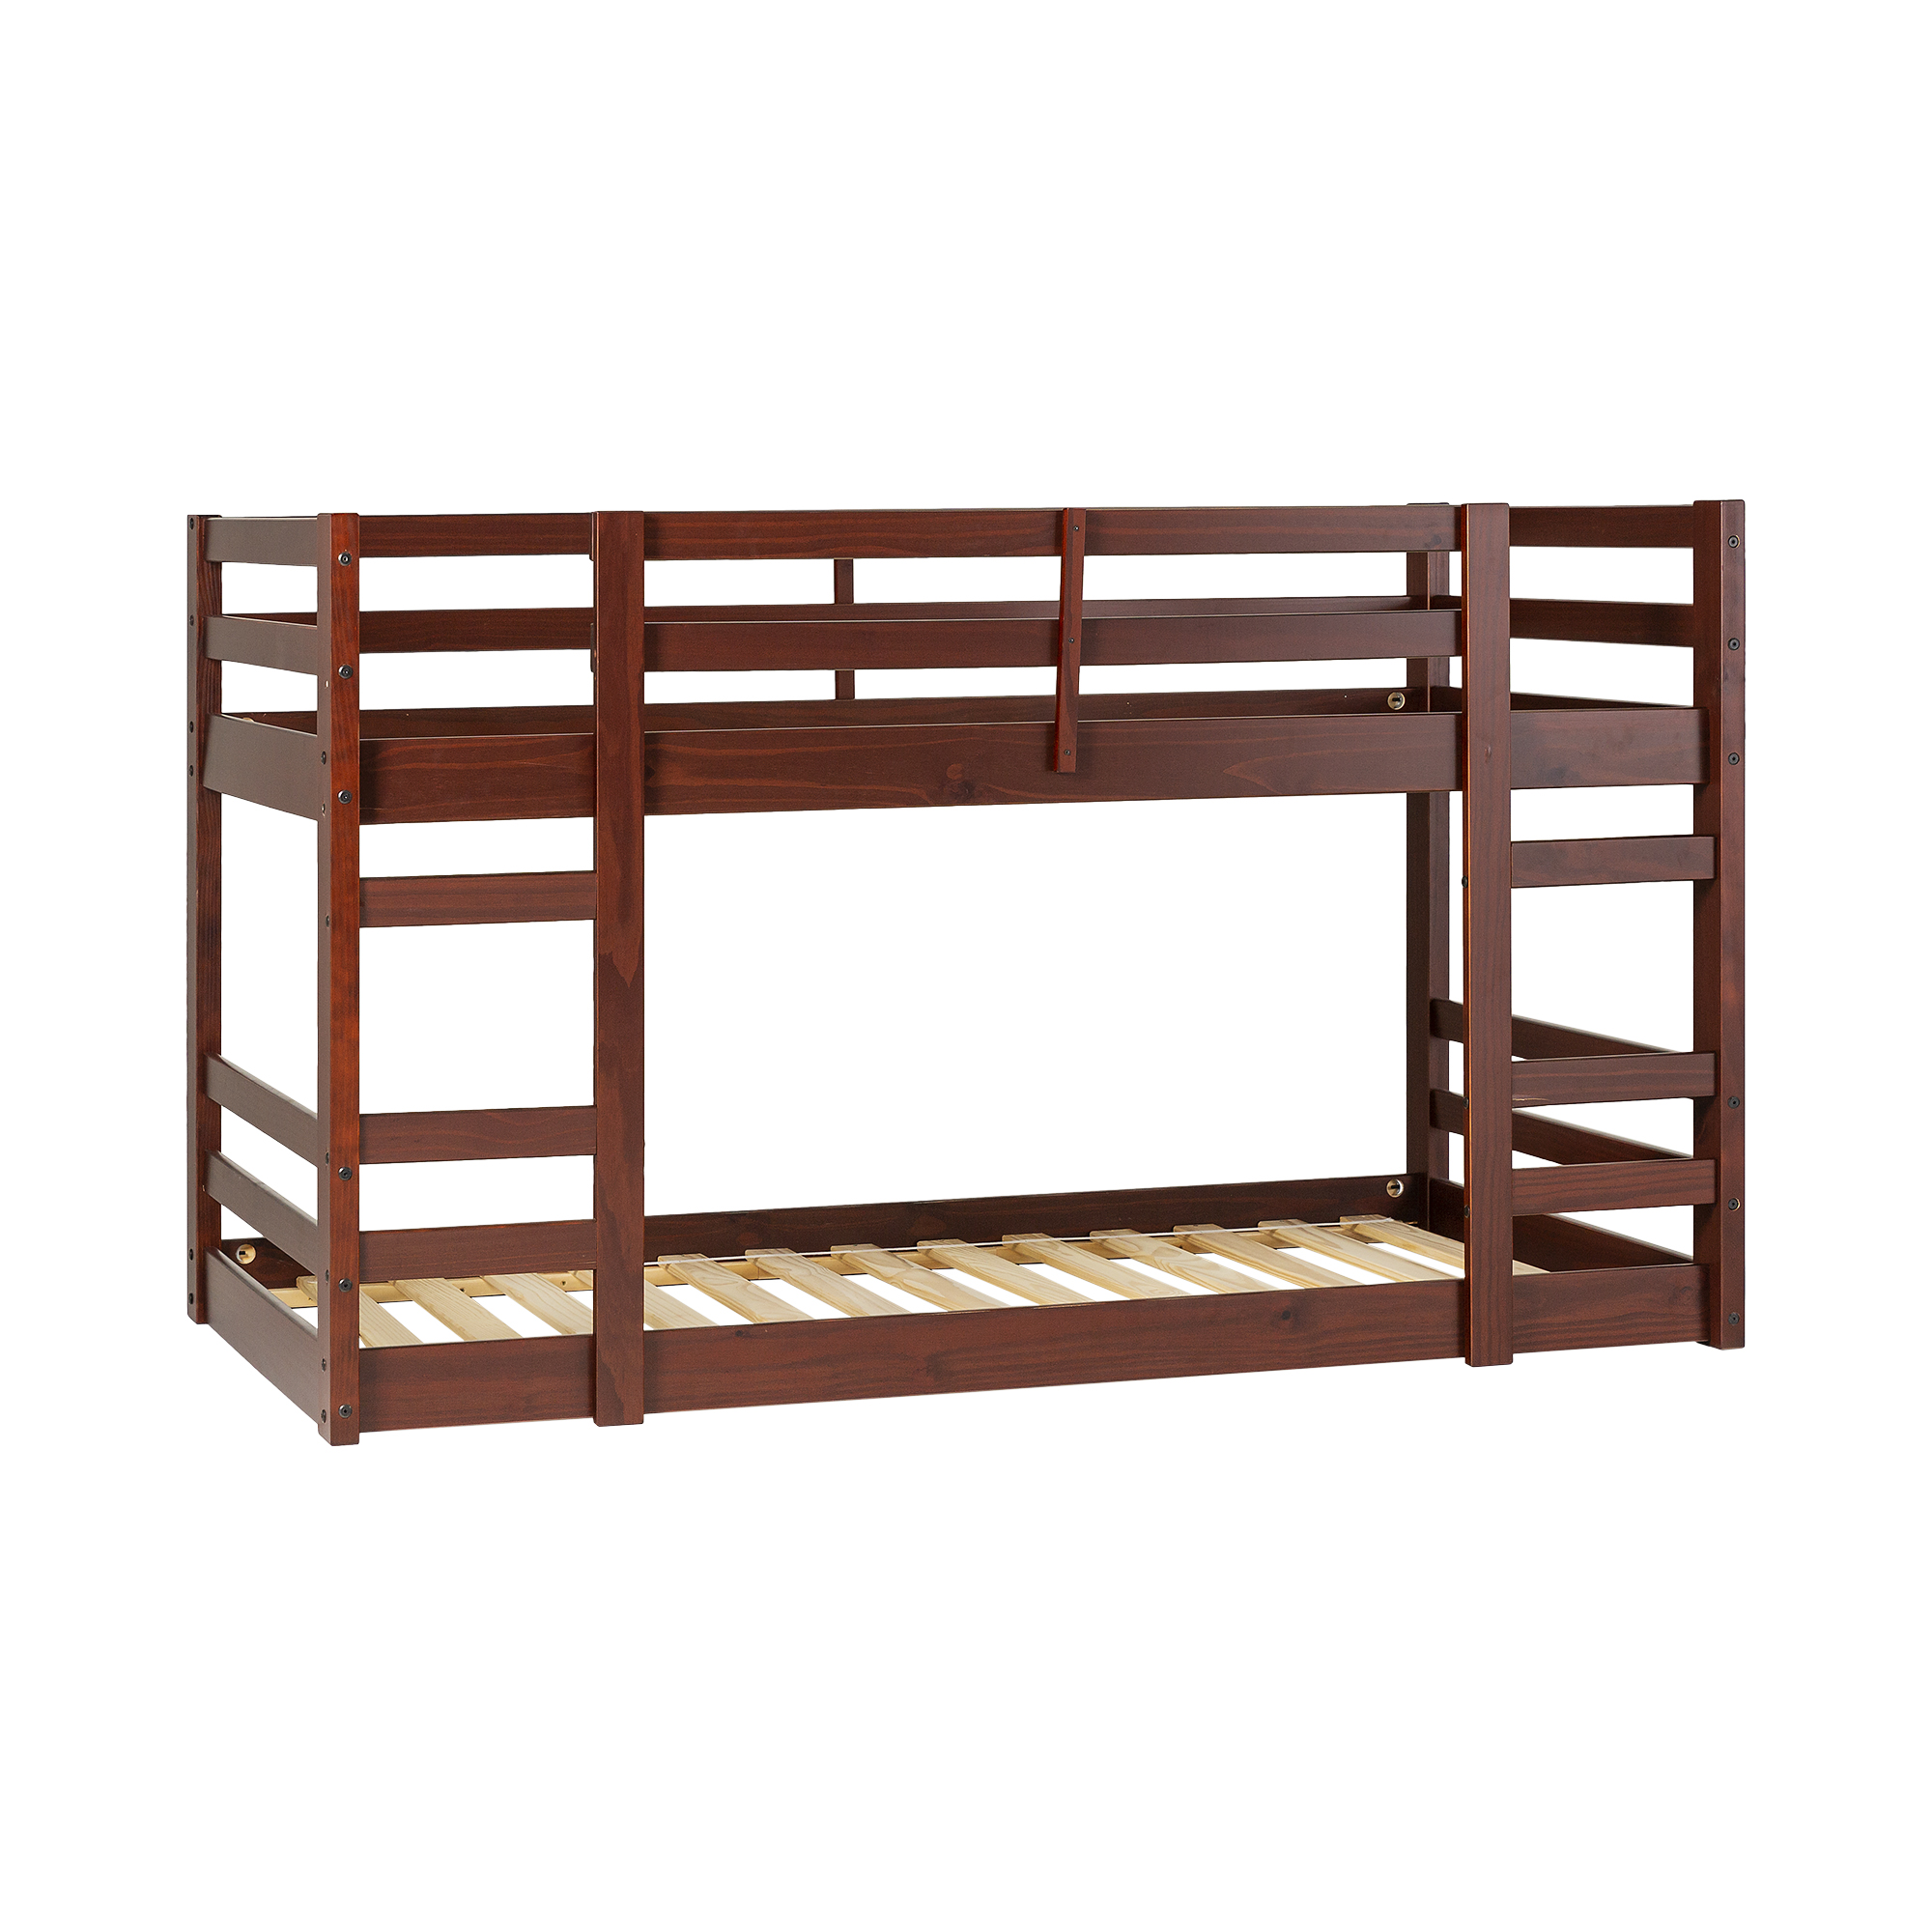 Manor Park Transitional Youth Twin Over Twin Bunk Bed Frame, Espresso - image 3 of 17